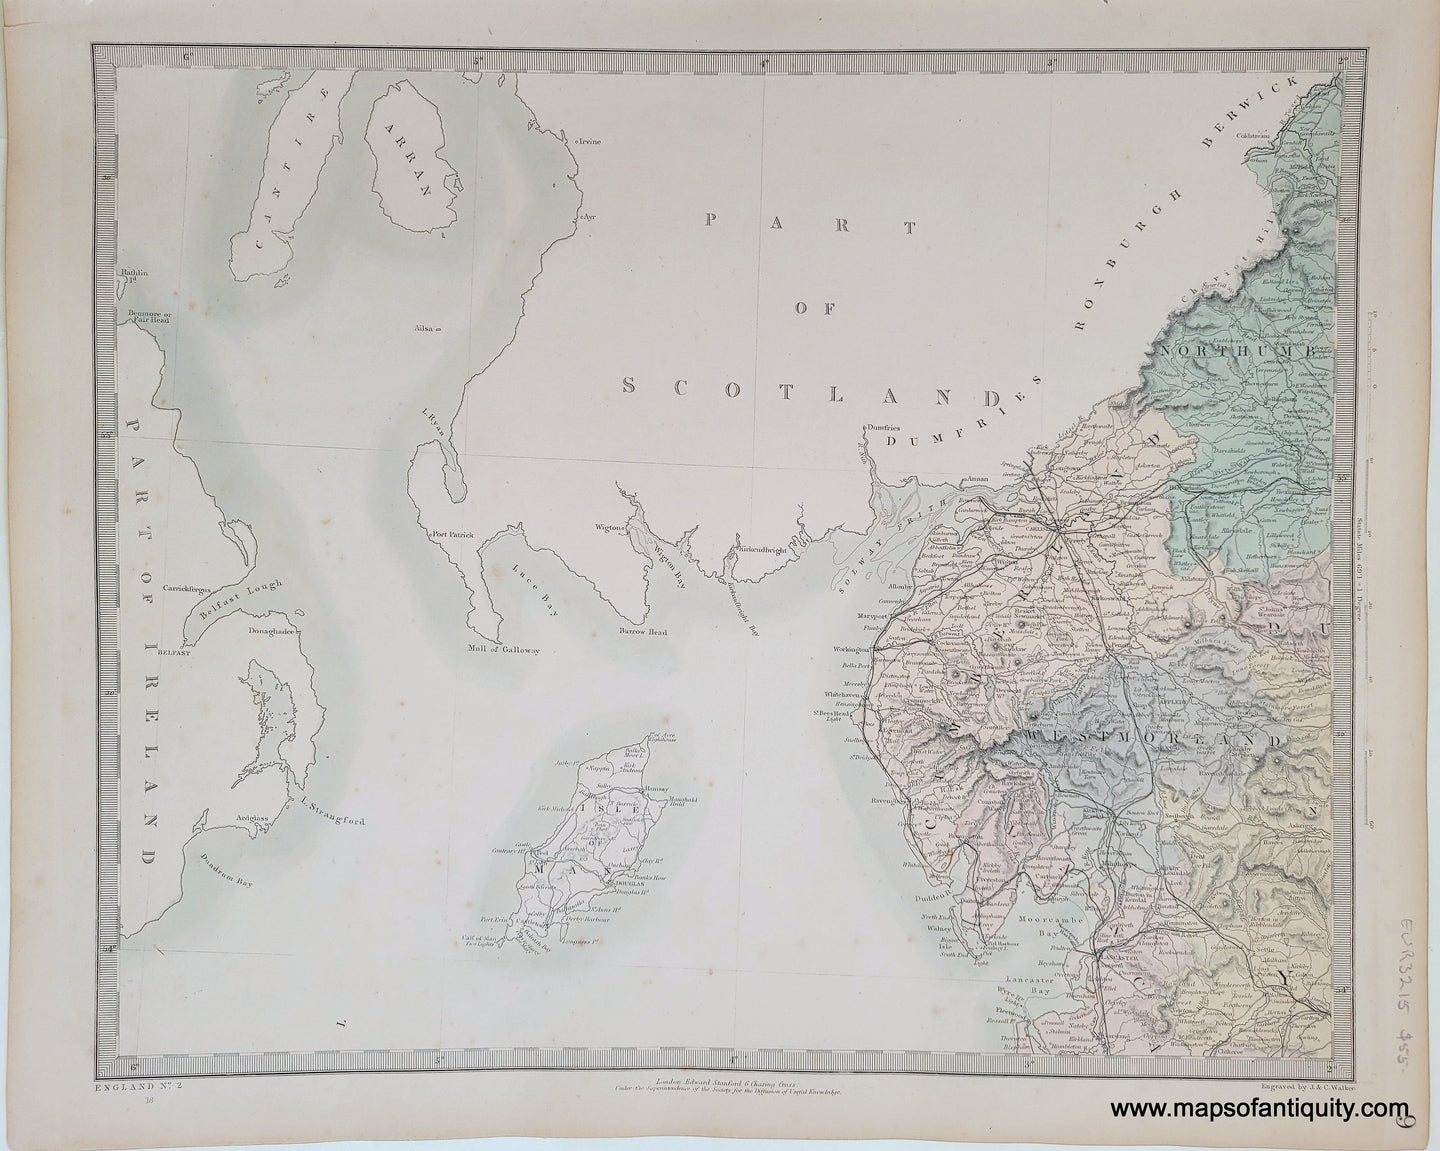 Genuine-Antique-Map-England-and-Wales-in-six-sheets-sheet-2-England-and-Wales--1860-SDUK-Society-for-the-Diffusion-of-Useful-Knowledge-Maps-Of-Antiquity-1800s-19th-century